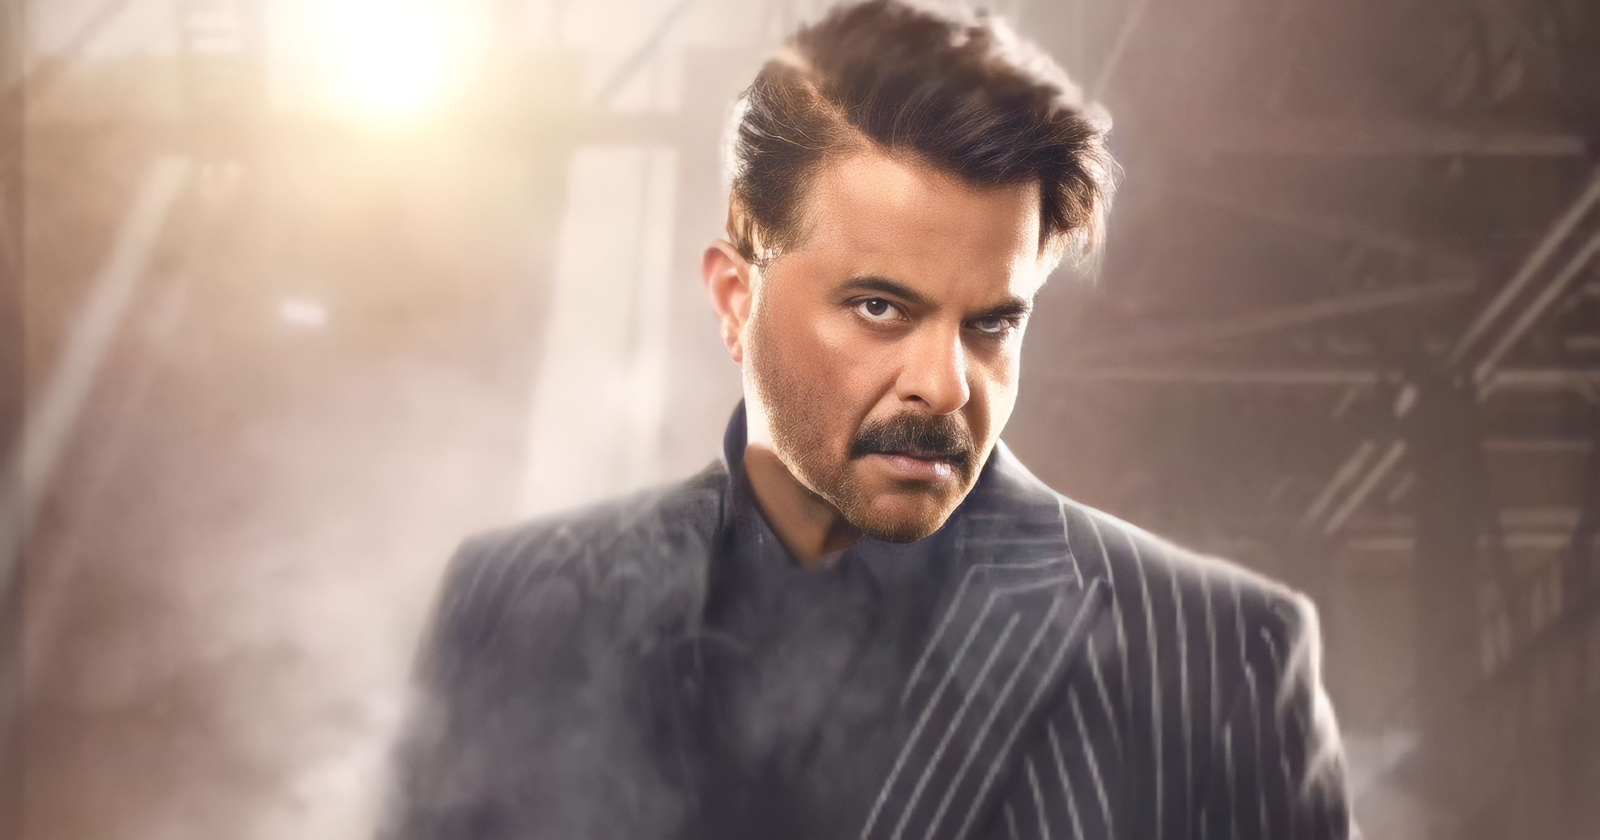 The Night Manager: Anil Kapoor Looks Suave In This Motion Poster Of His Next Film